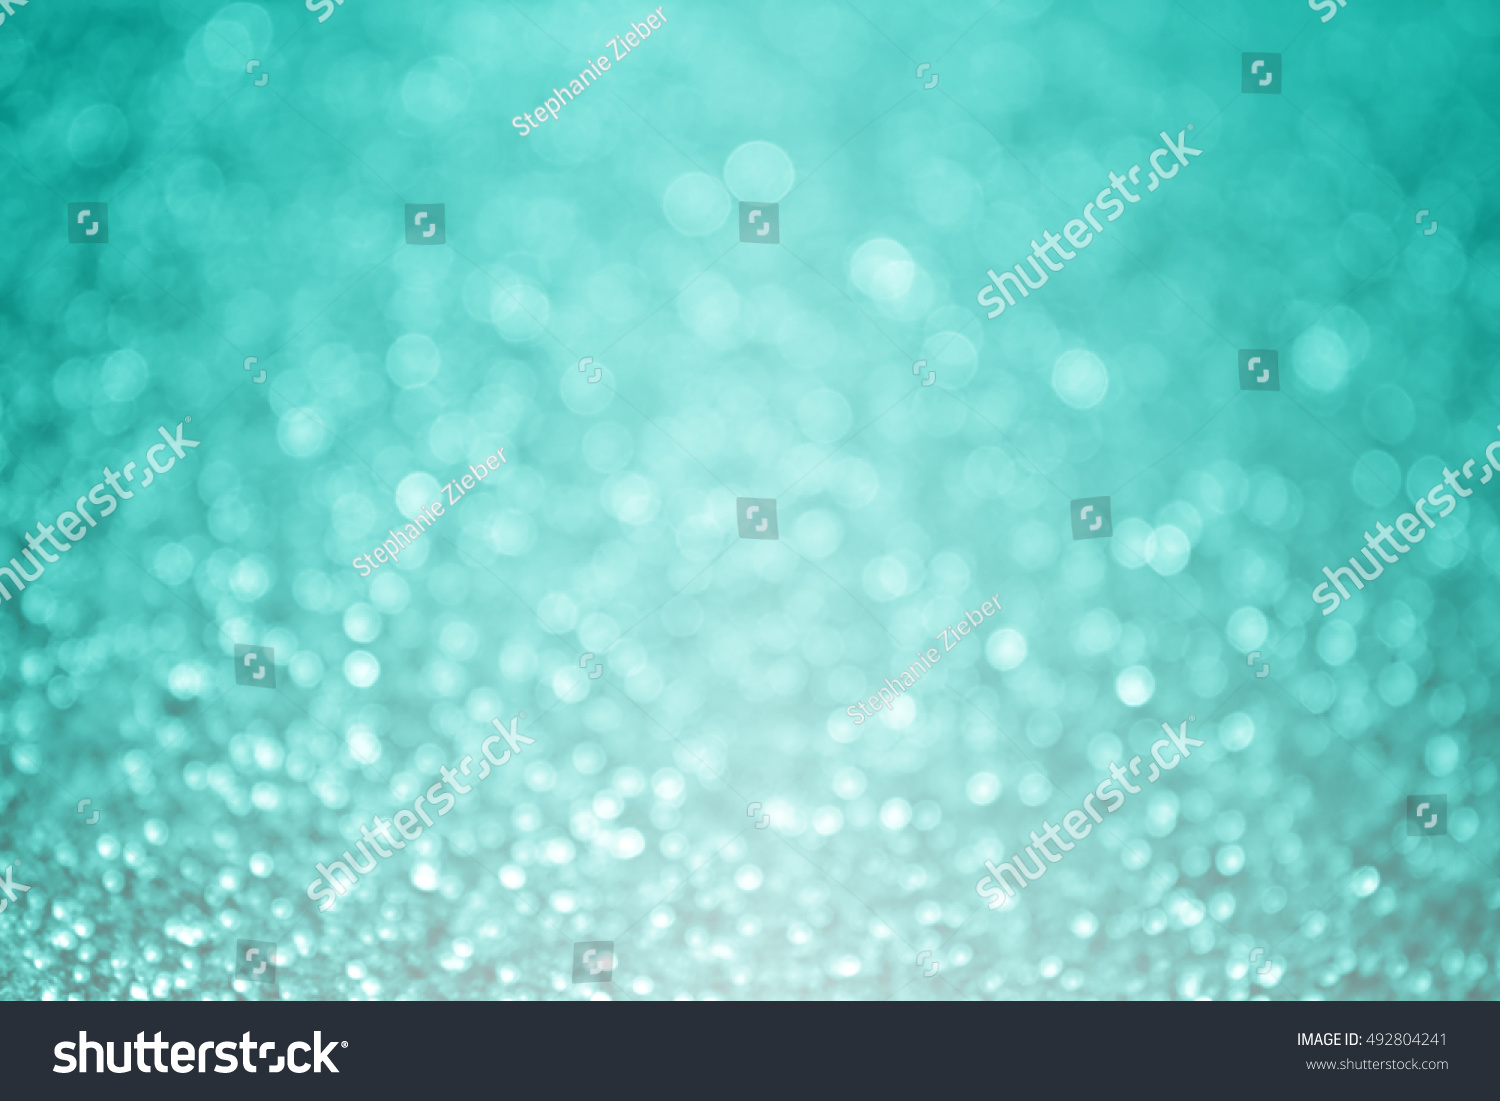 Abstract teal turquoise and mint aqua green glitter sparkle background or party invitation design #492804241